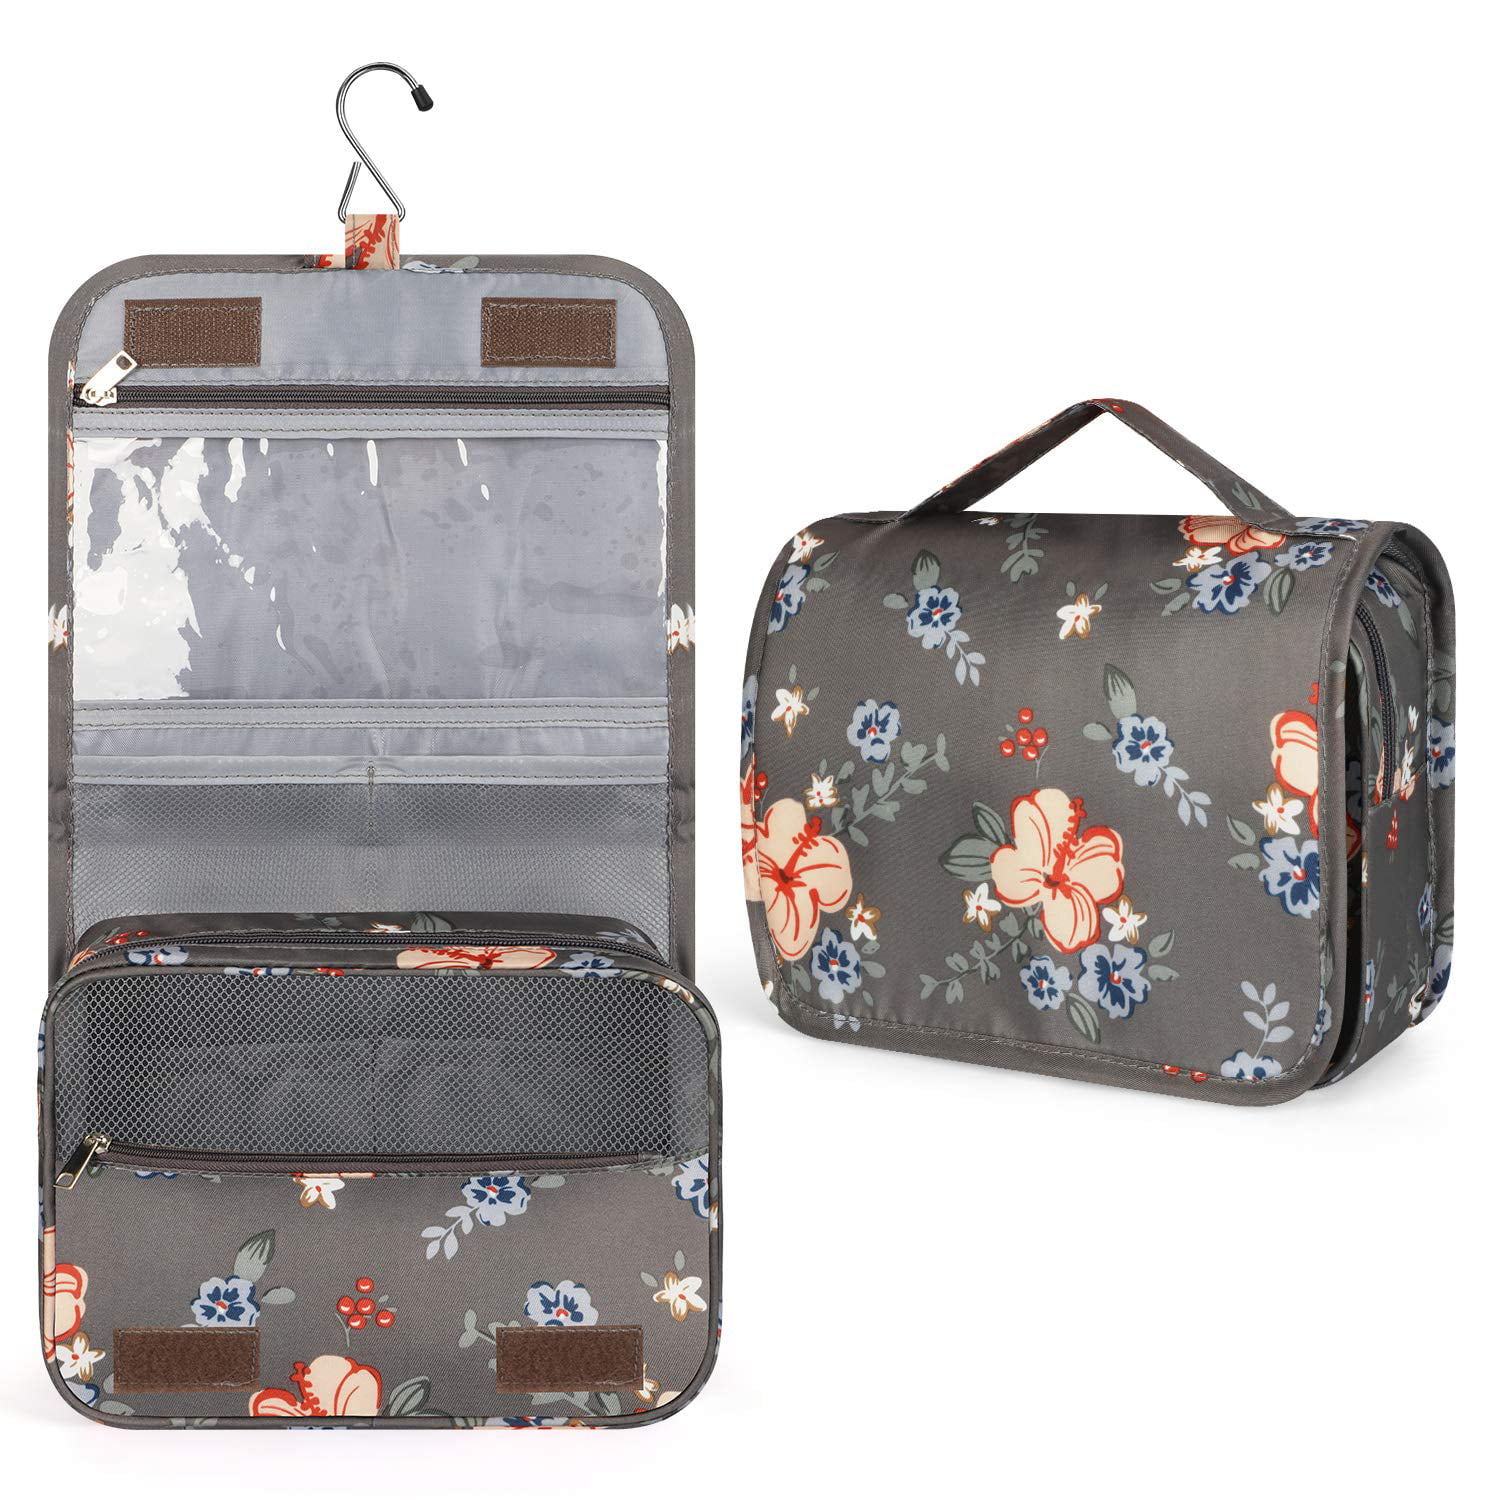 Women Makeup Travel Bag for Toiletries Waterproof Shower Bag with Large Capacity Foldable Toiletry Bags for Traveling Toiletry Bag Travel Toiletries Bags with Hanging Hook 